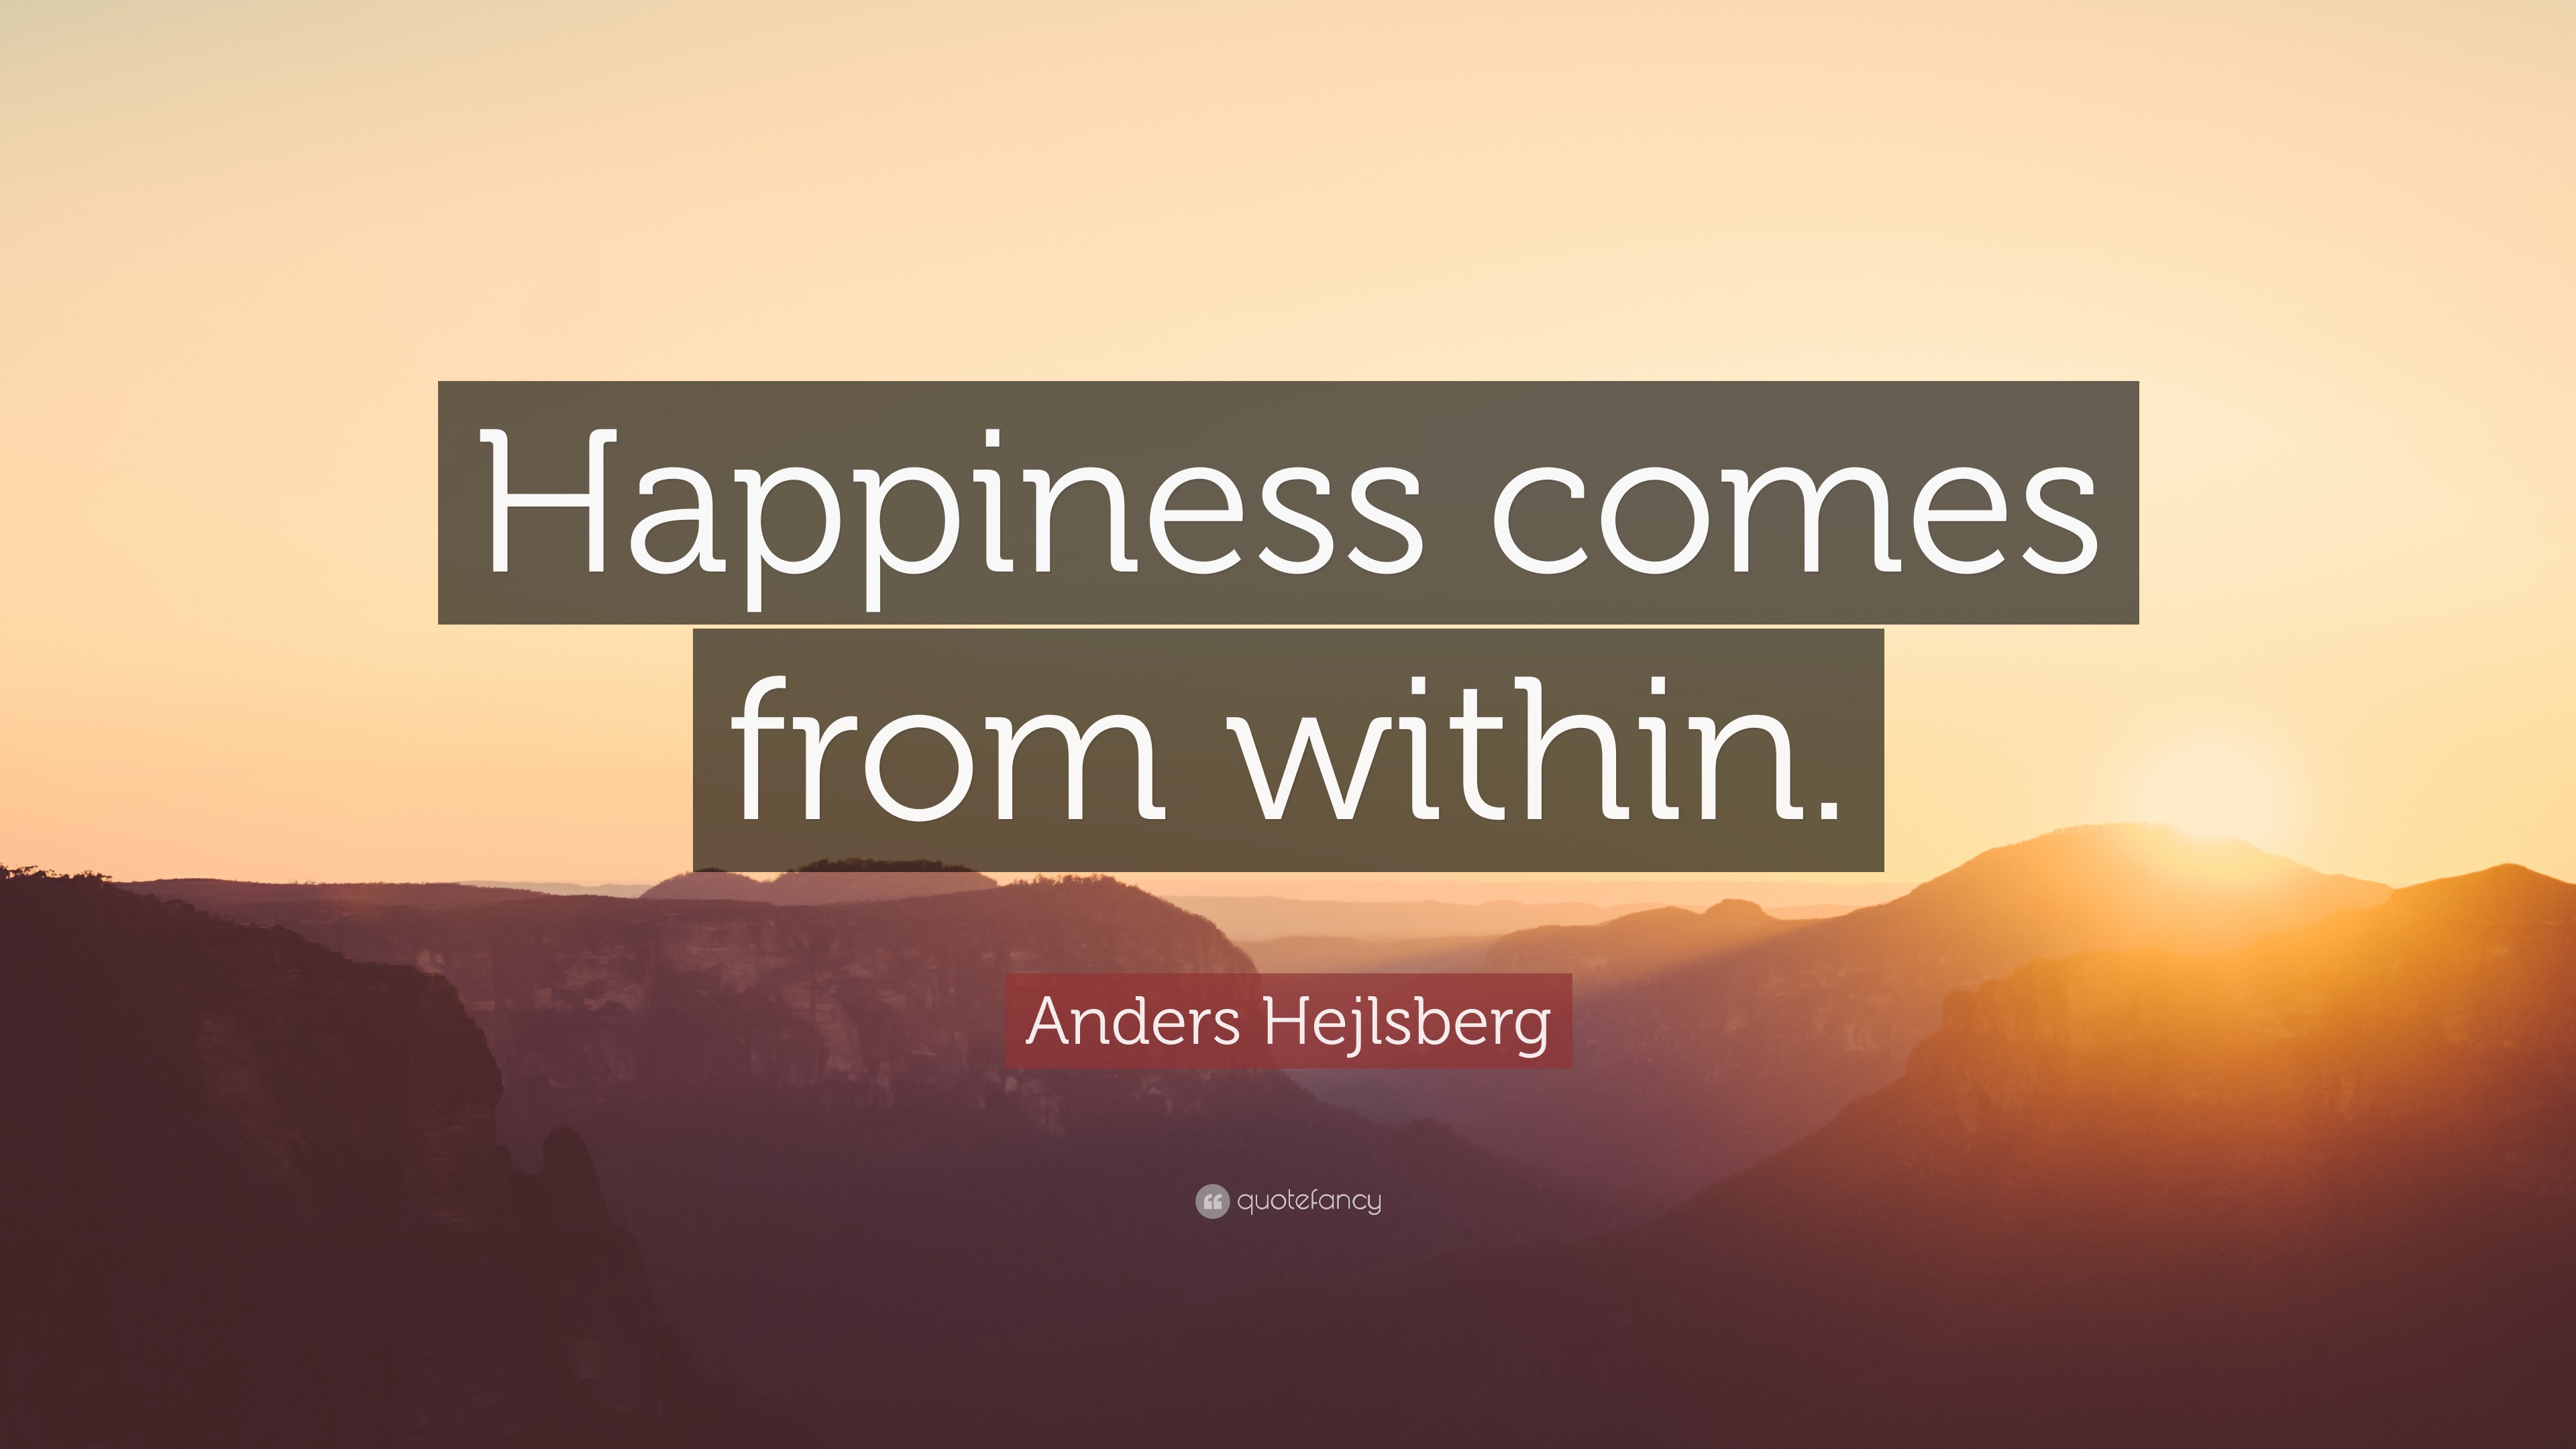 Anders Hejlsberg Quote: “Happiness comes from within.”